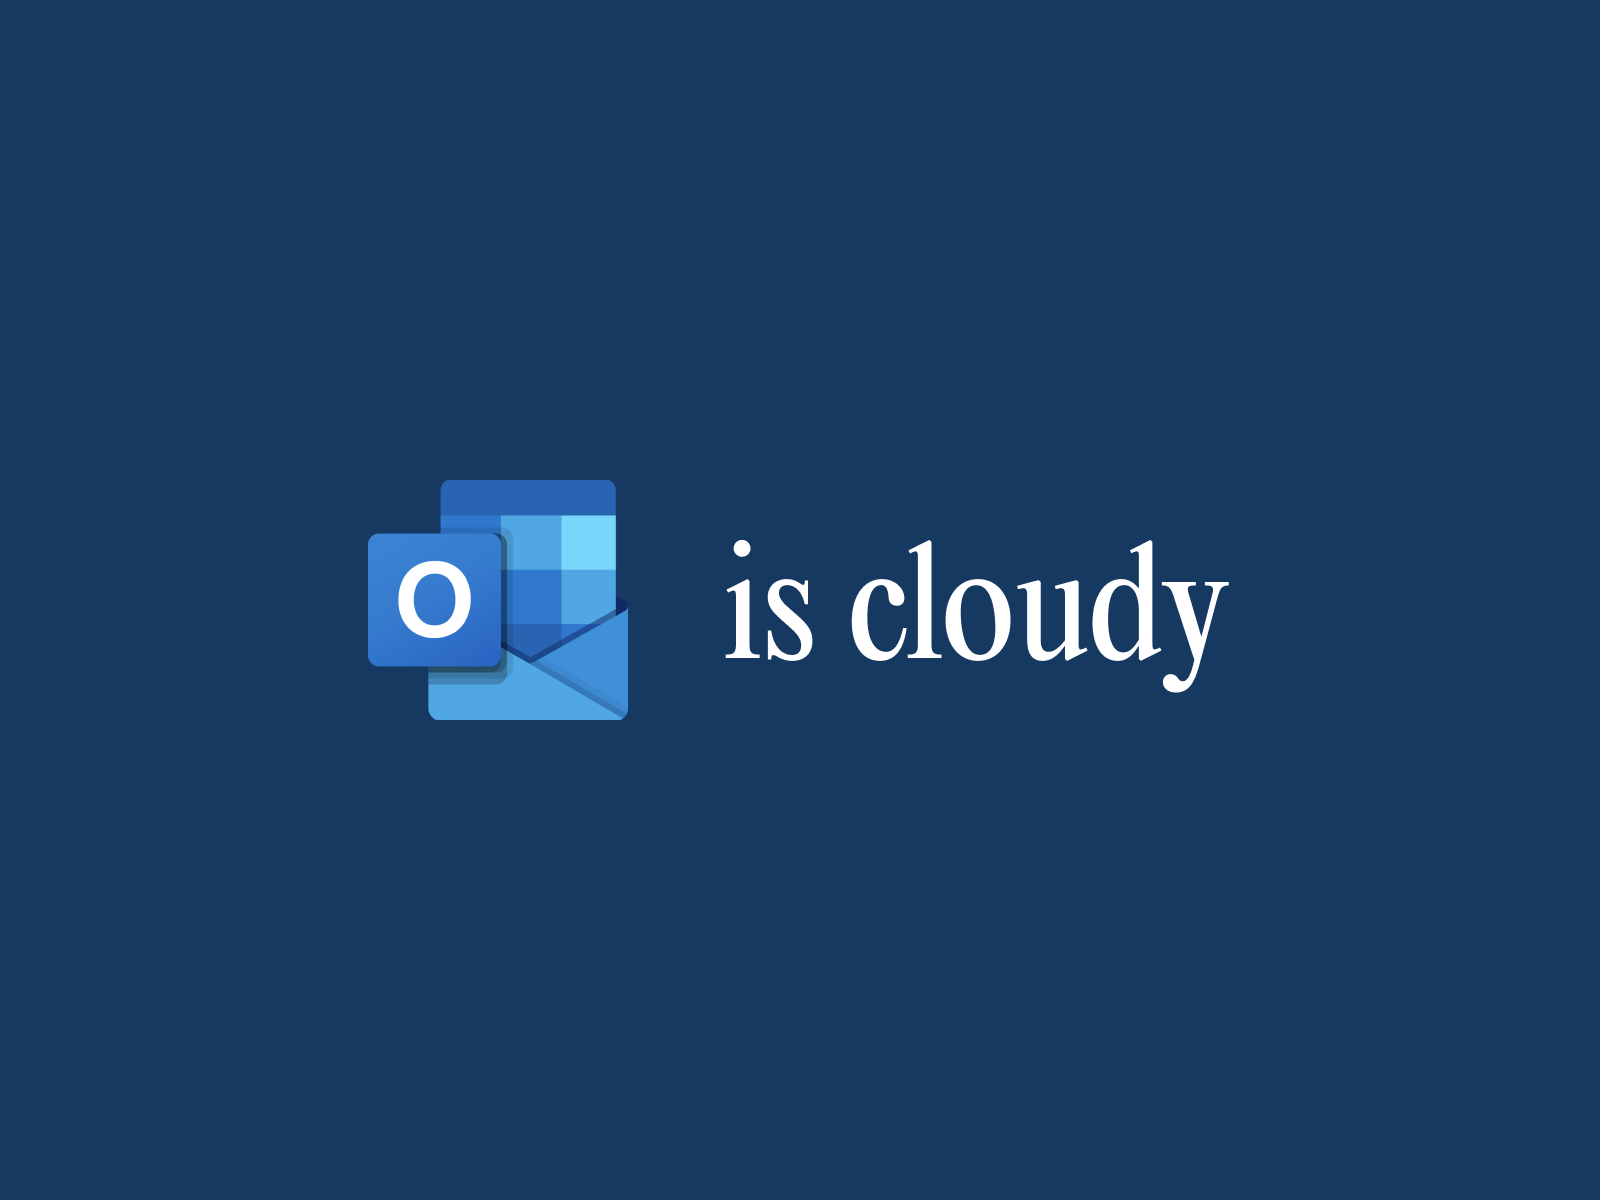 outlook is cloudy